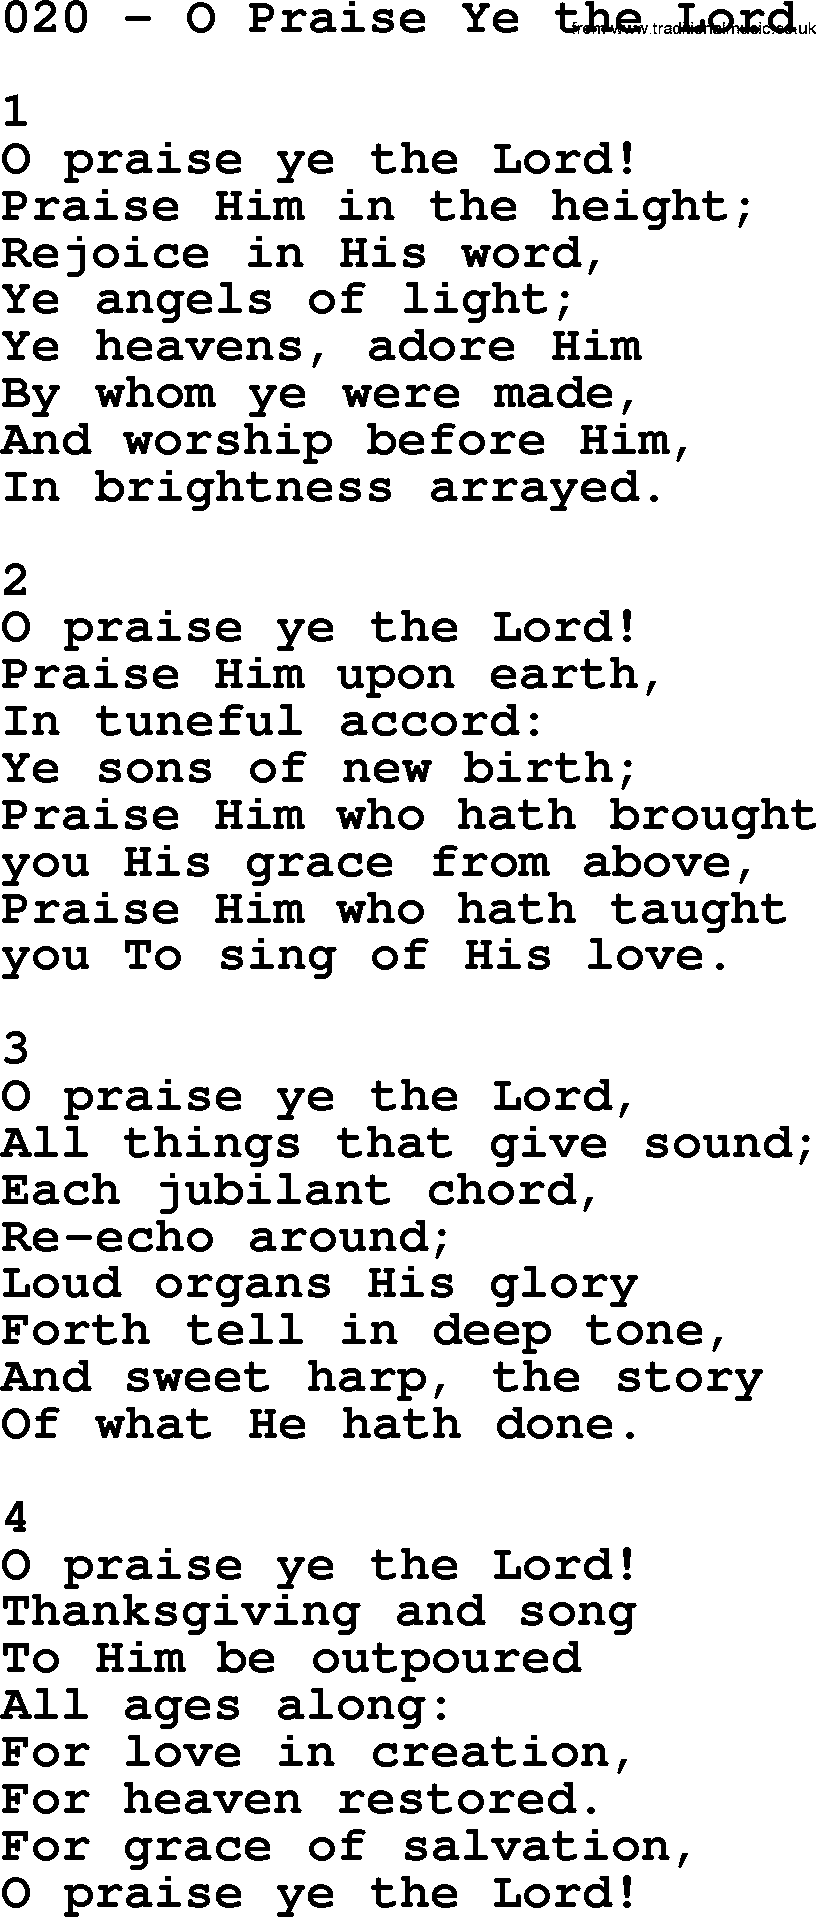 Complete Adventis Hymnal, title: 020-O Praise Ye The Lord, with lyrics, midi, mp3, powerpoints(PPT) and PDF,